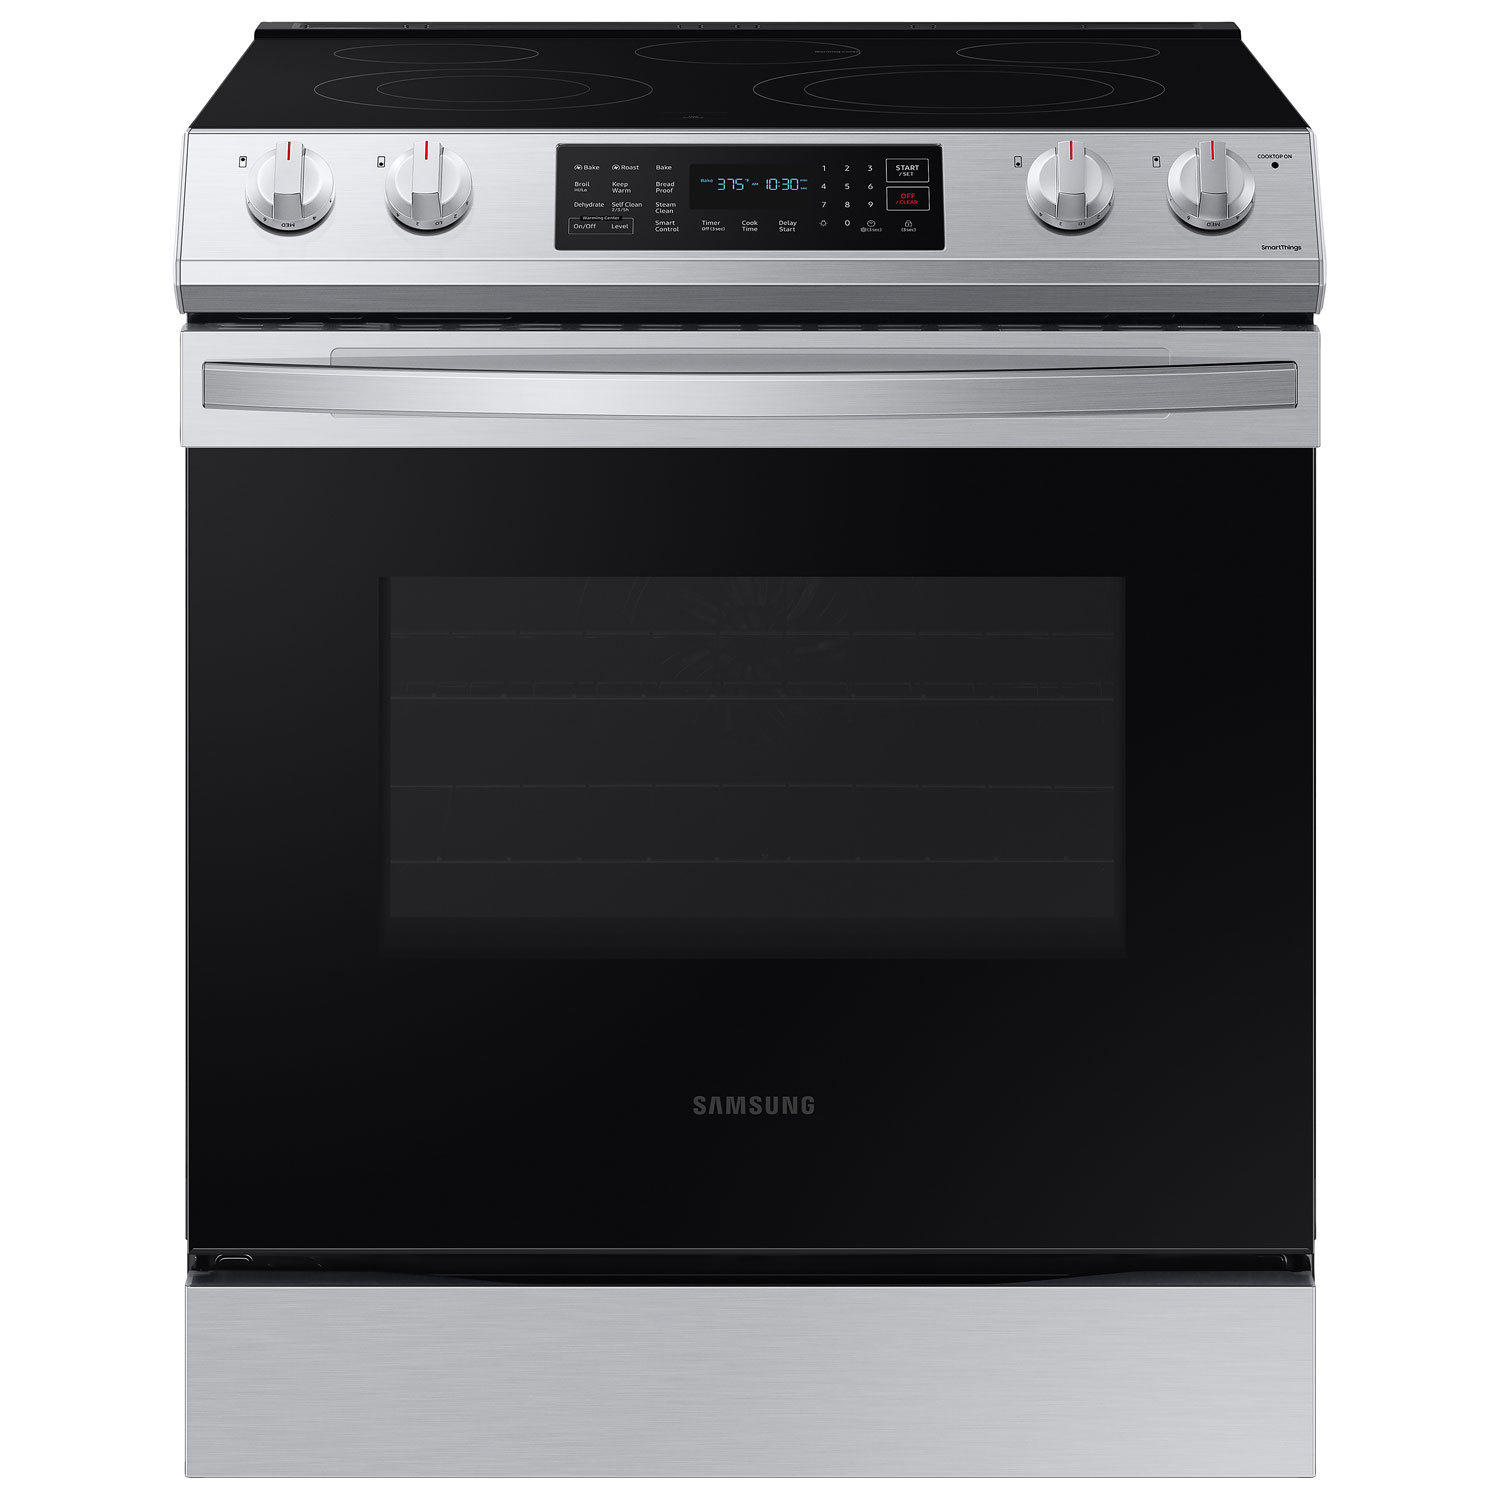 Samsung 30" 6.3 Cu. Ft. Fan Convection 5-Element Slide-In Electric Range (NE63T8311SS) - Stainless